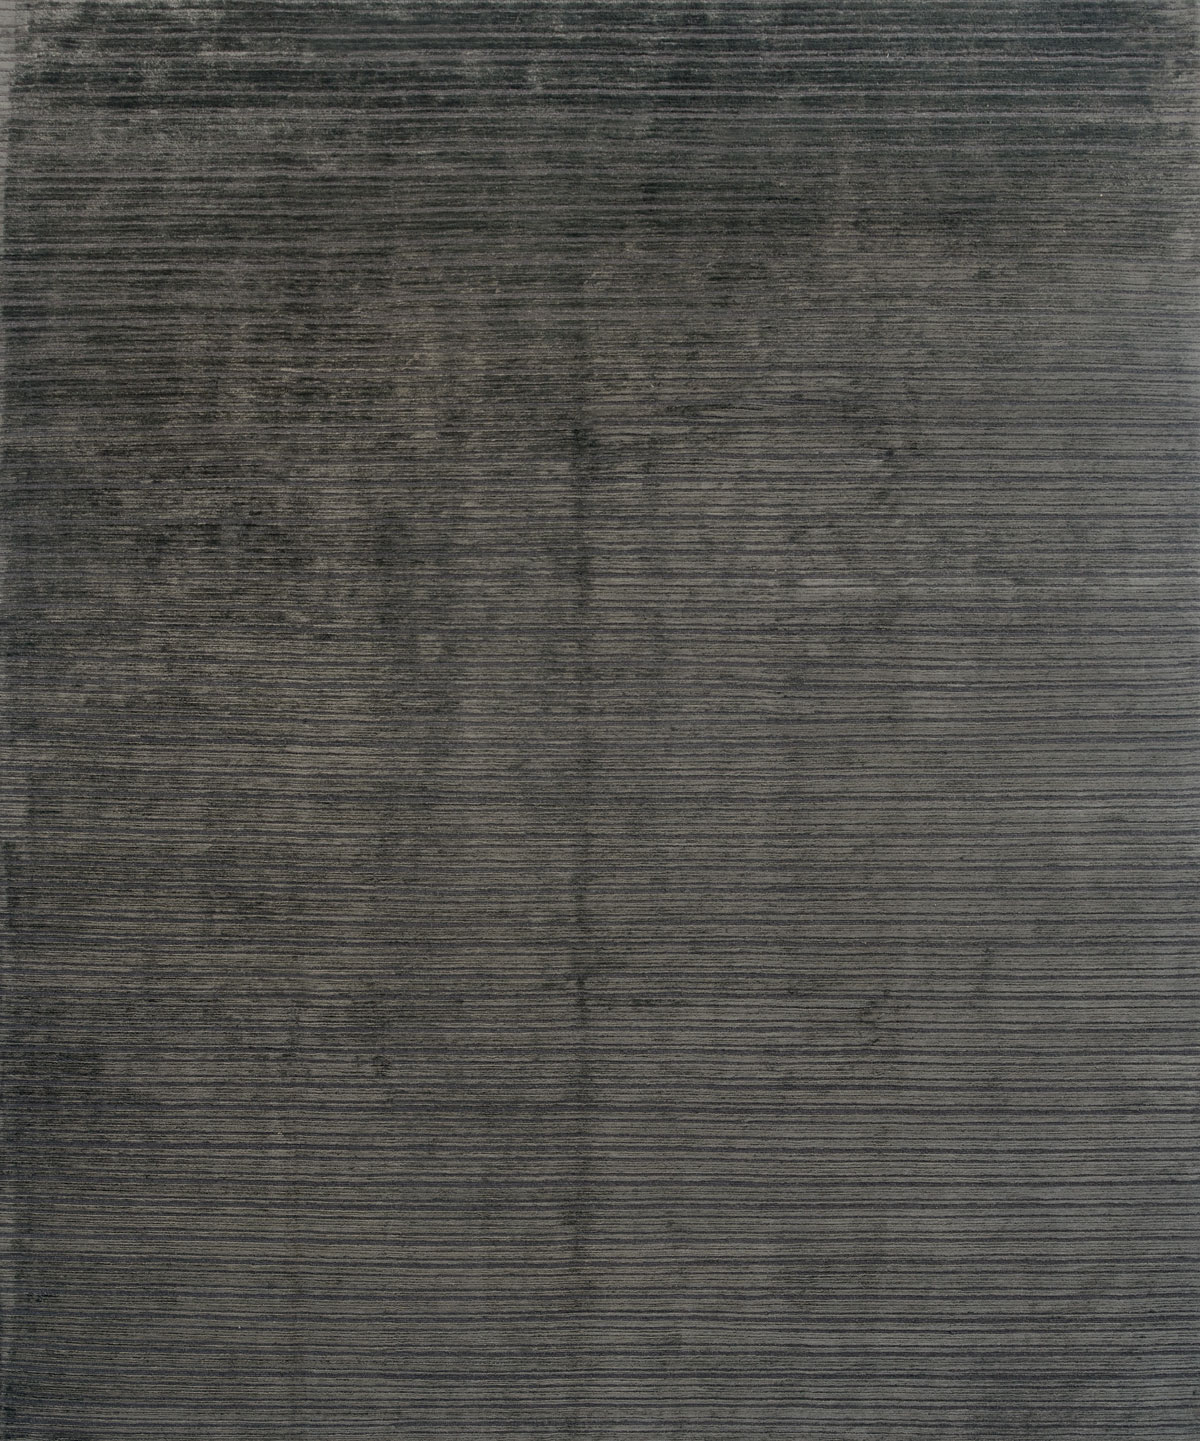 Eccelso Antracite Handknotted Rug ☞ Size: 350 x 450 cm